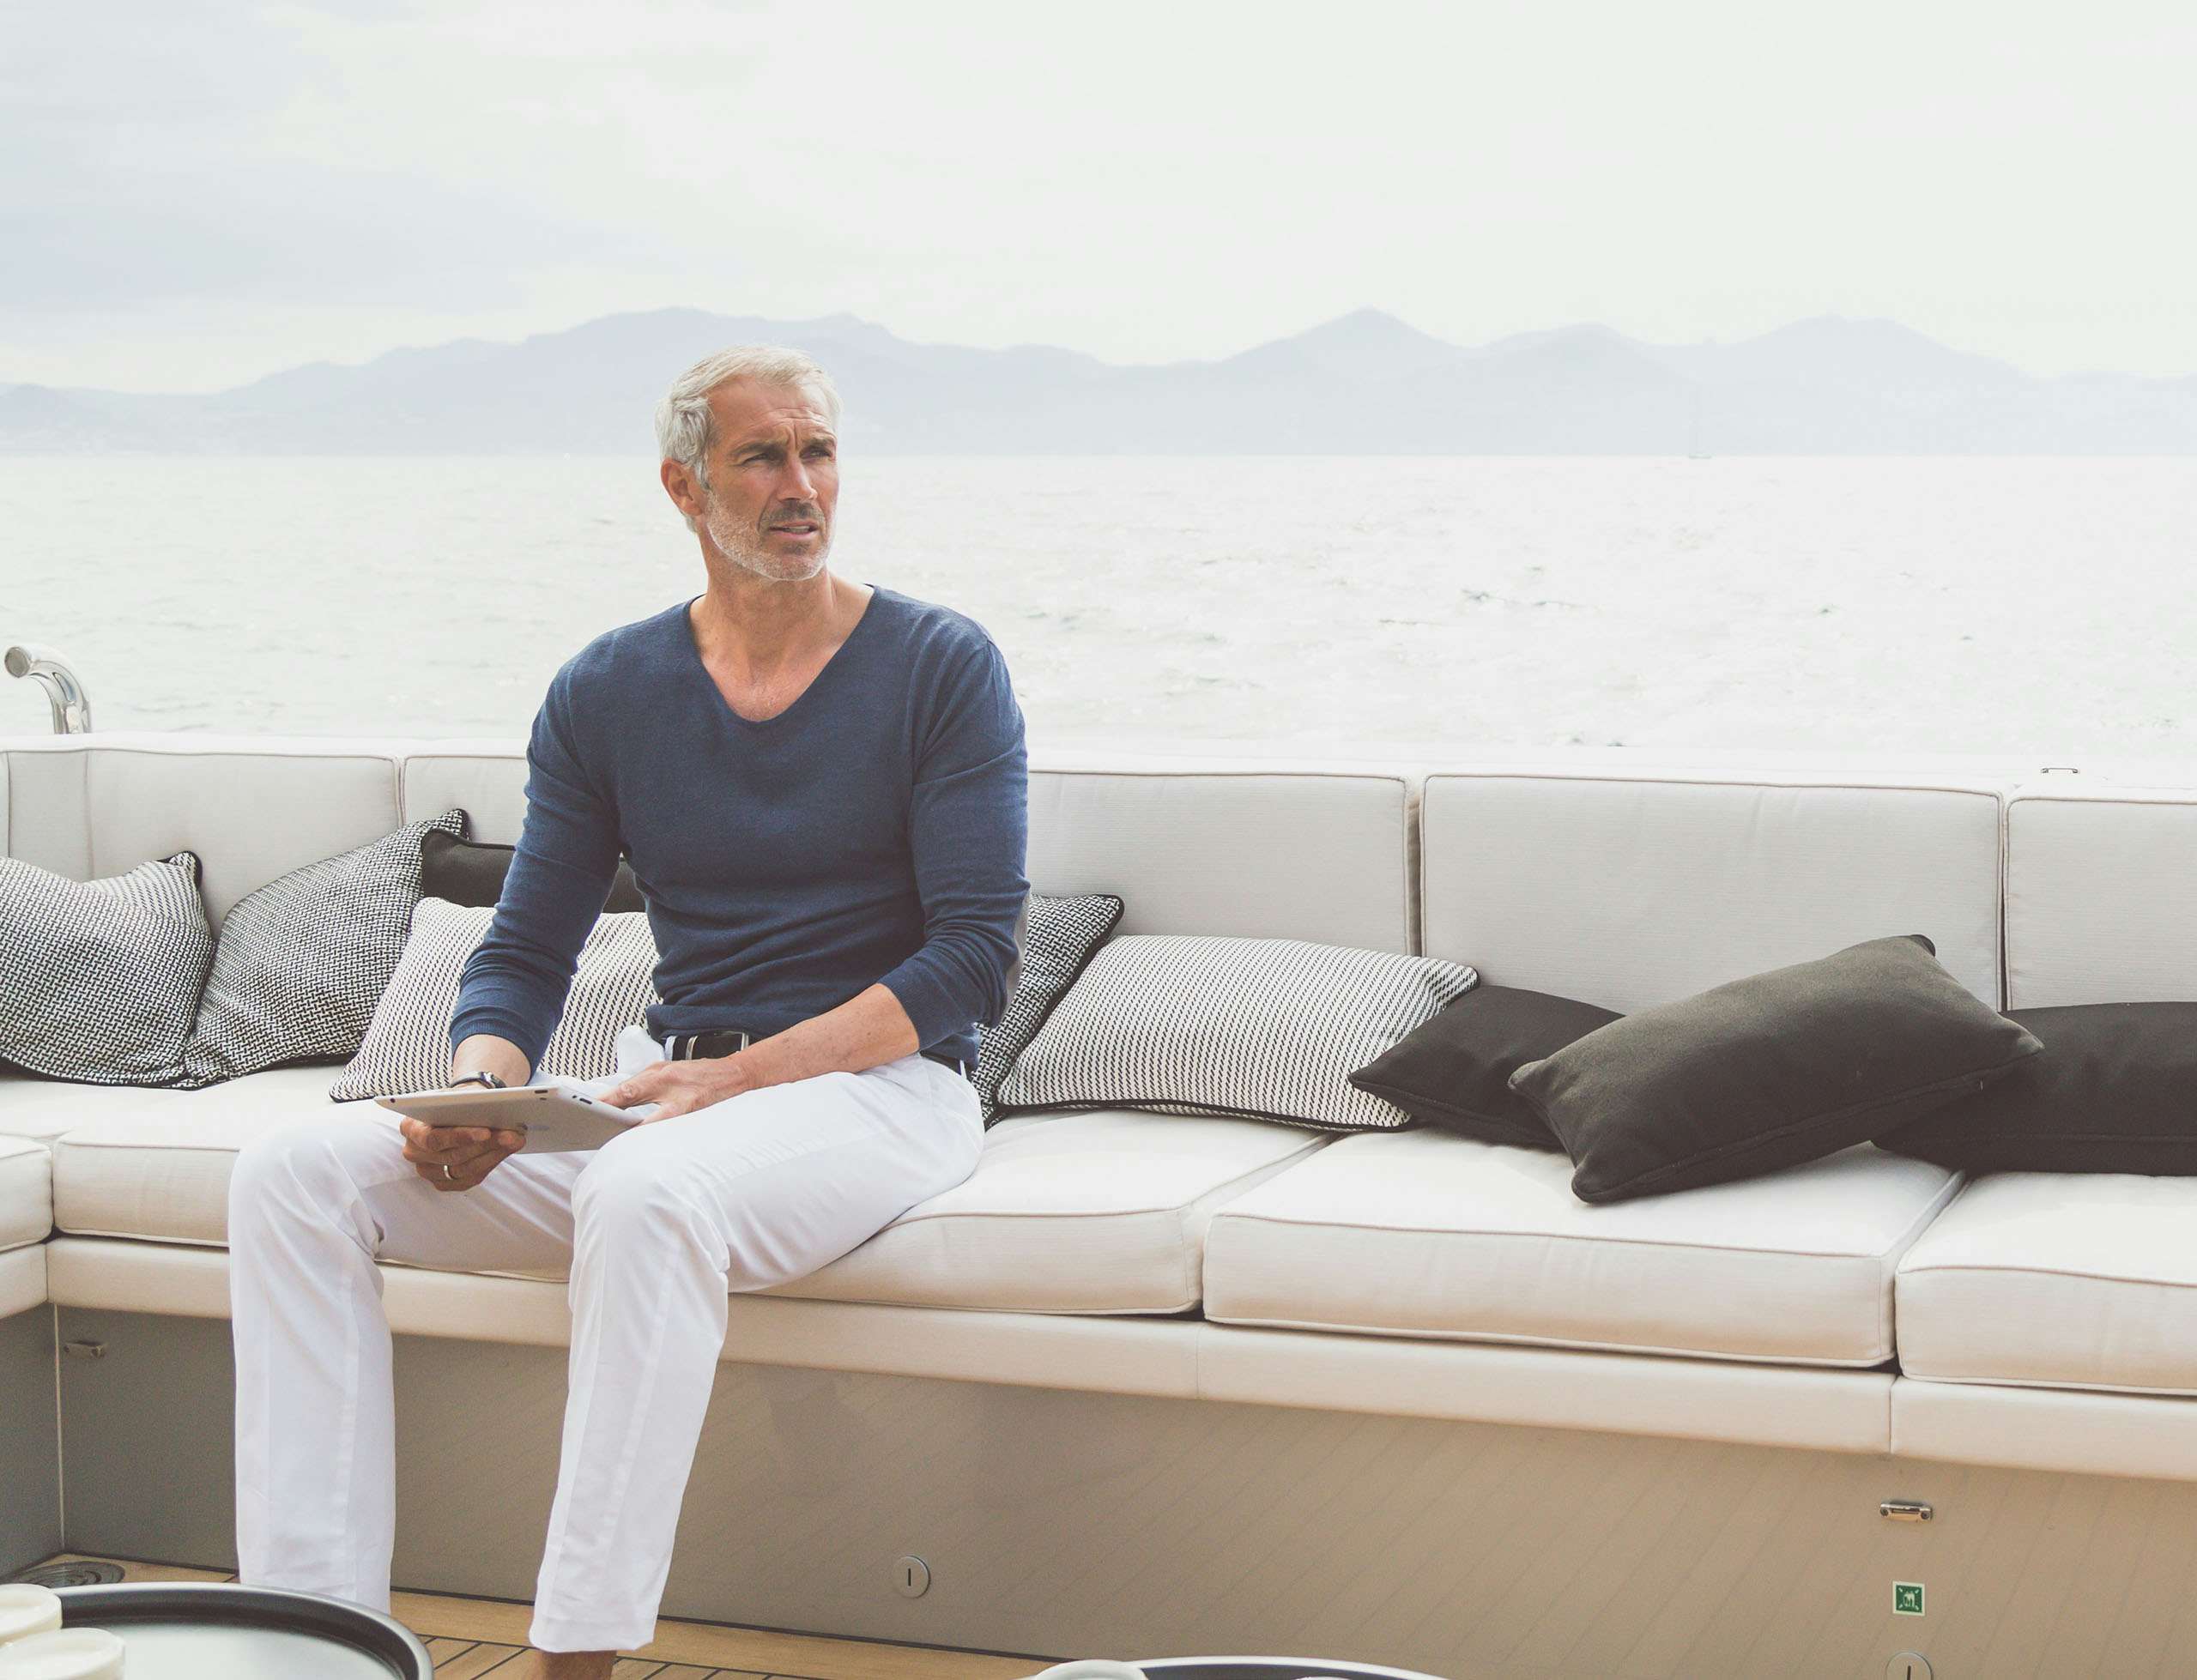 Yacht owner sitting on sundeck with tablet in hand